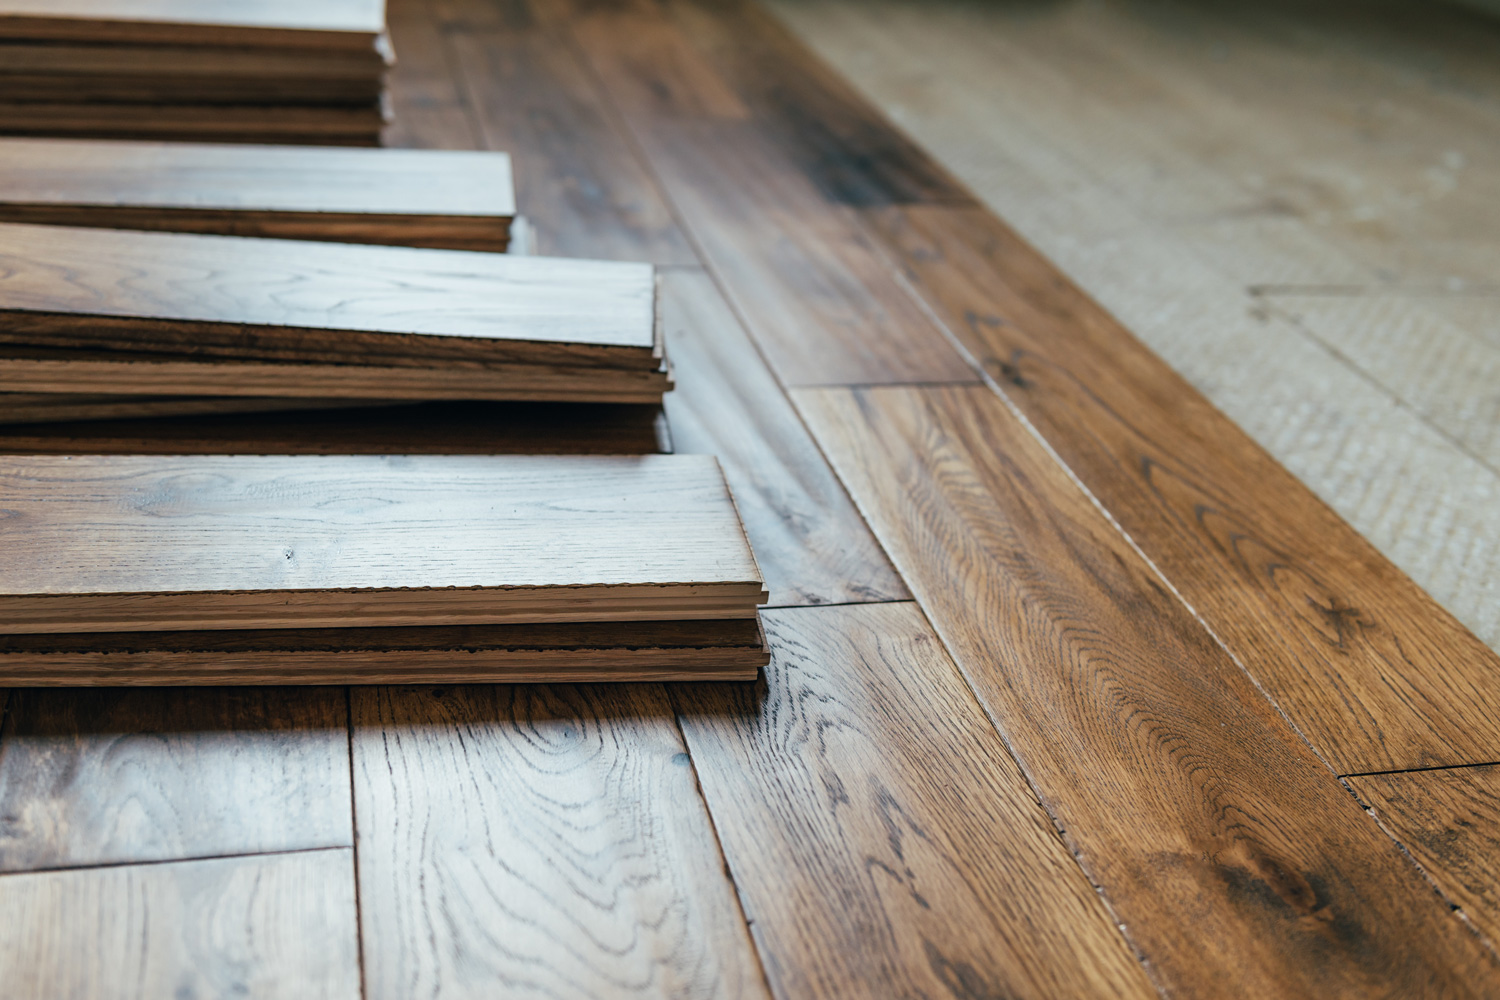 The process of house renovation with changing of the floor from carpets to solid oak wood.